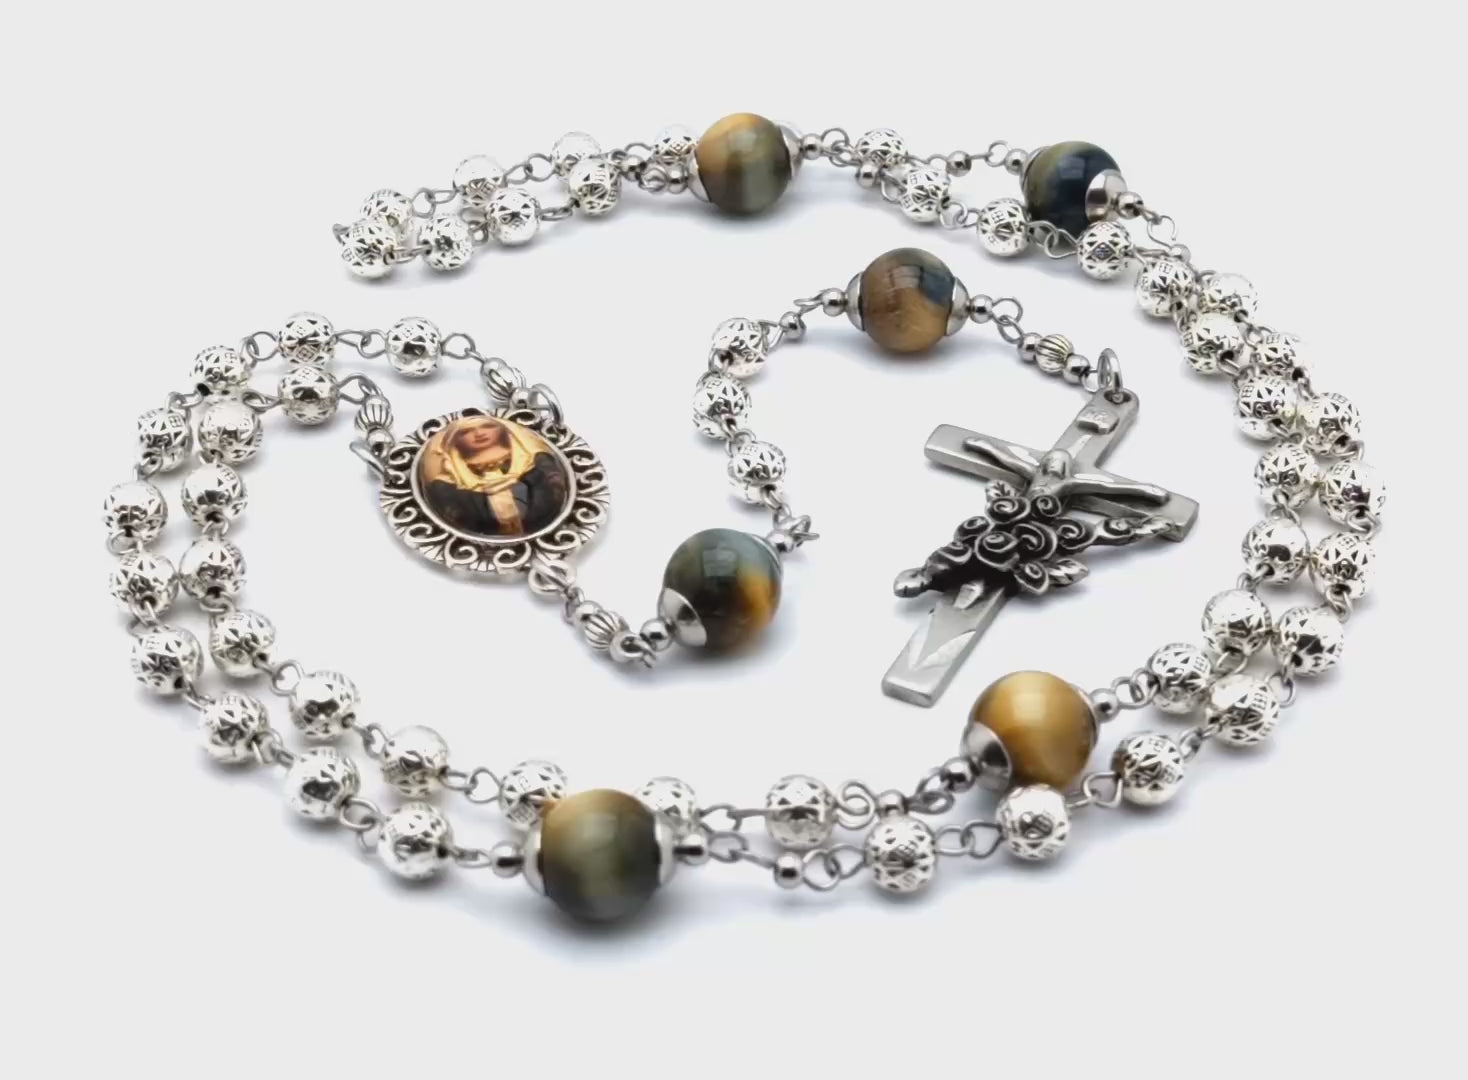 Our Lady of the Rosary unique rosary beads with stainless steel and silver beads, floral etched crucifix and picture centre medal.